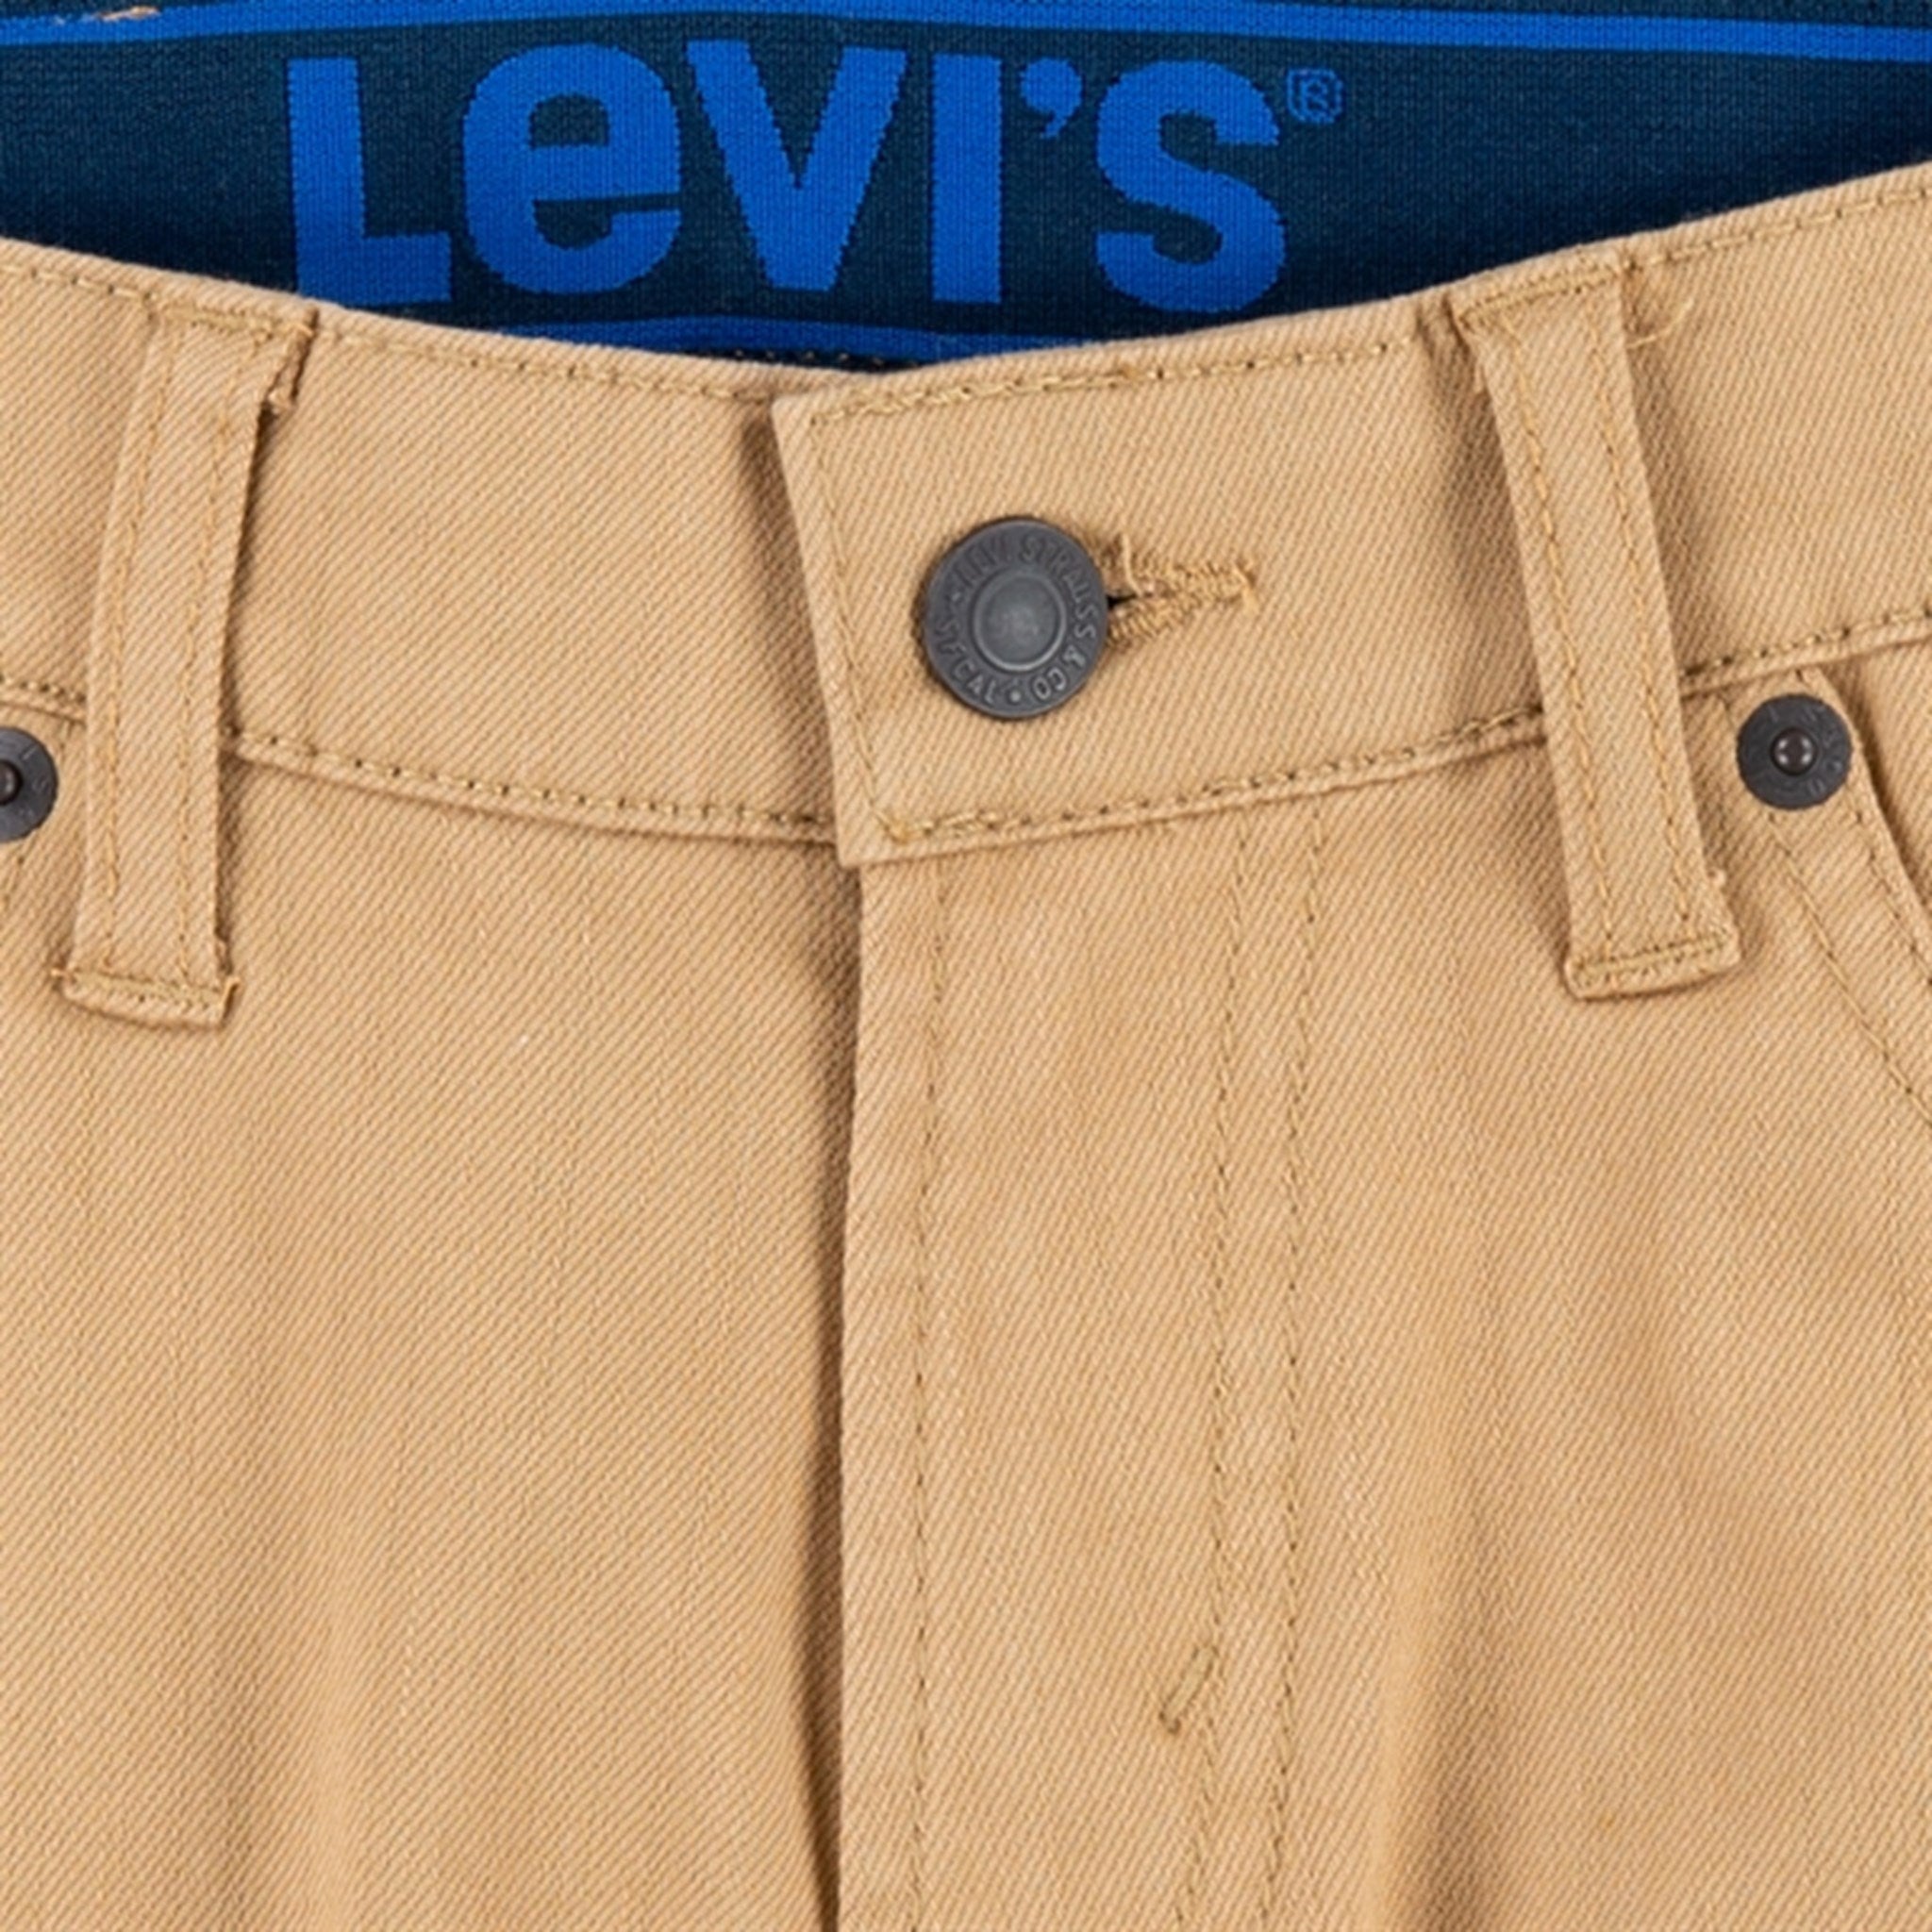 Levi's 502® Regular Taper Fit Strong Performance Jeans Beige 3